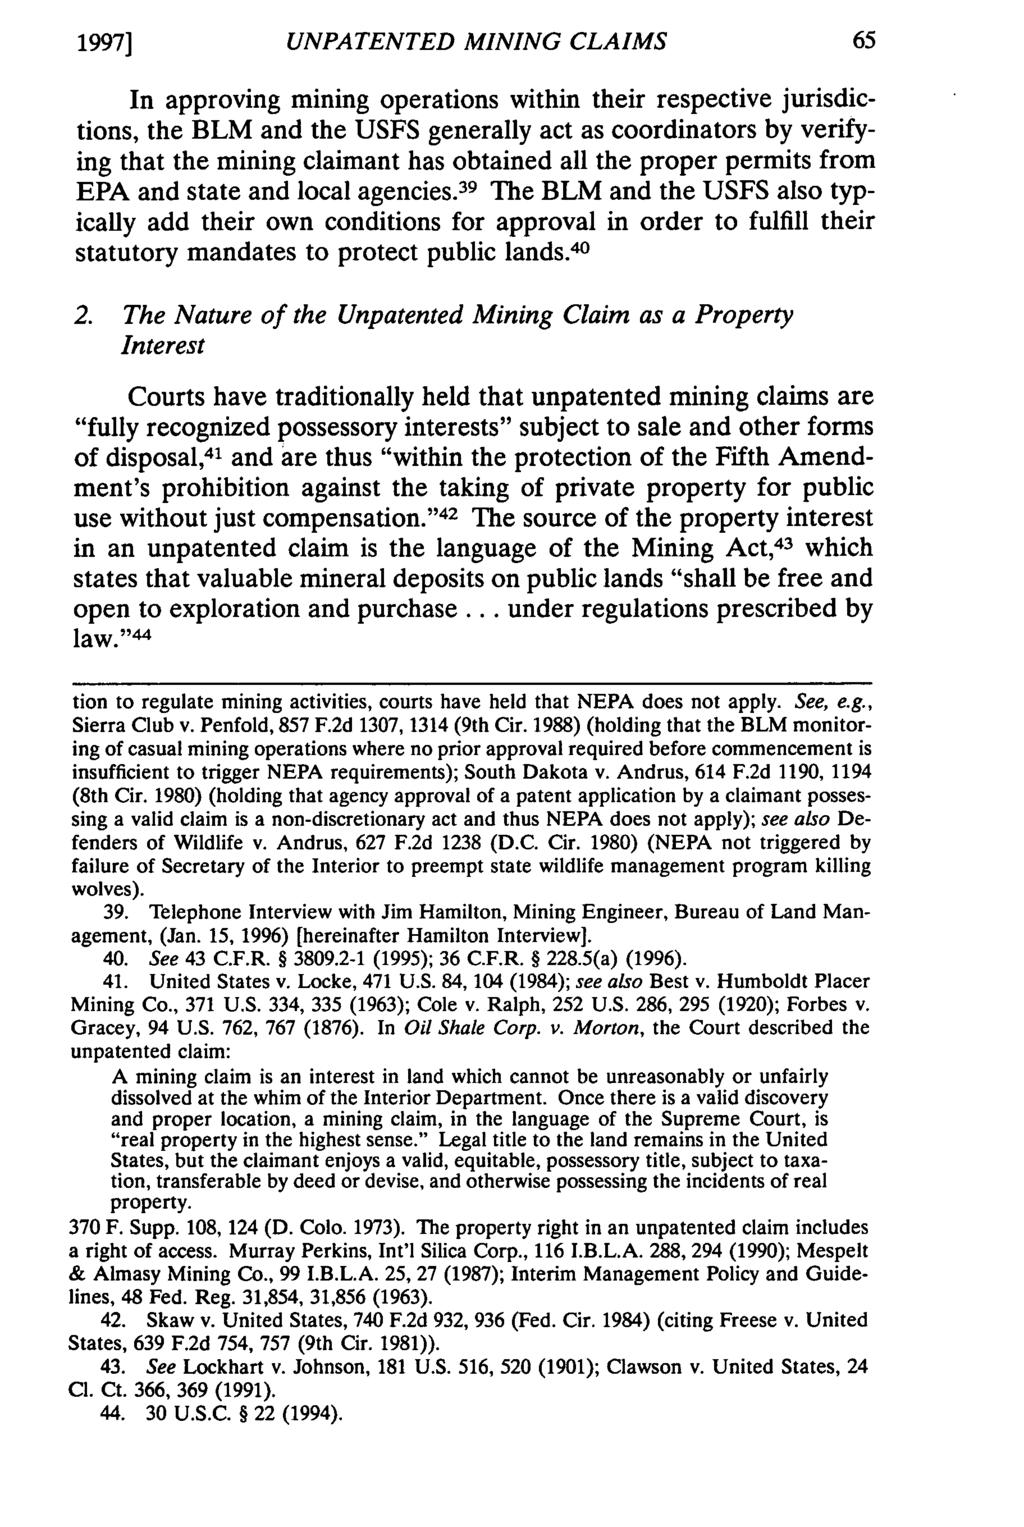 1997] UNPATENTED MINING CLAIMS In approving mining operations within their respective jurisdictions, the BLM and the USFS generally act as coordinators by verifying that the mining claimant has